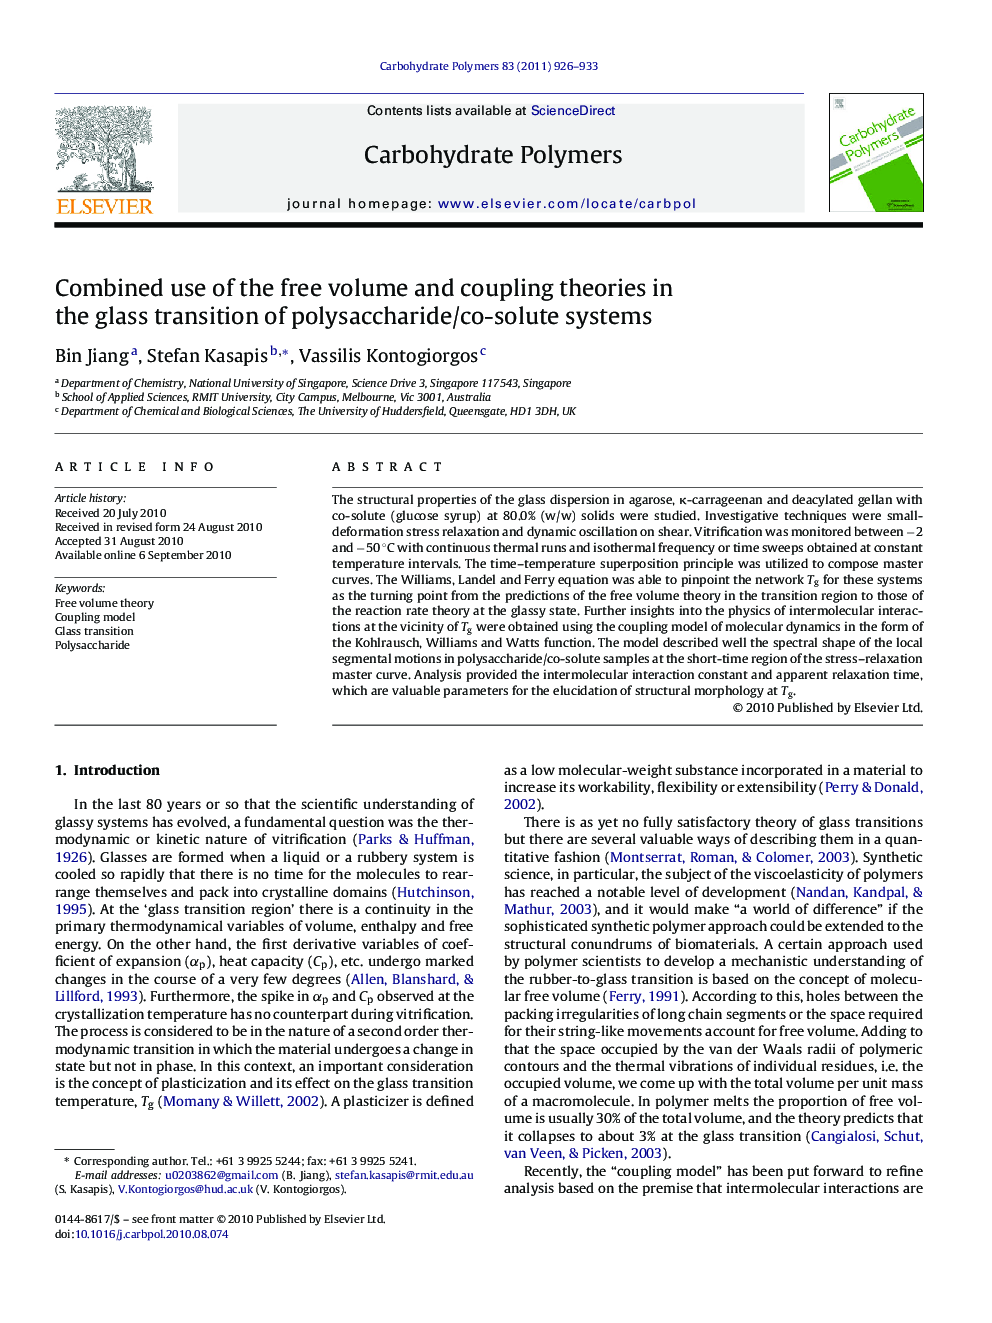 Combined use of the free volume and coupling theories in the glass transition of polysaccharide/co-solute systems